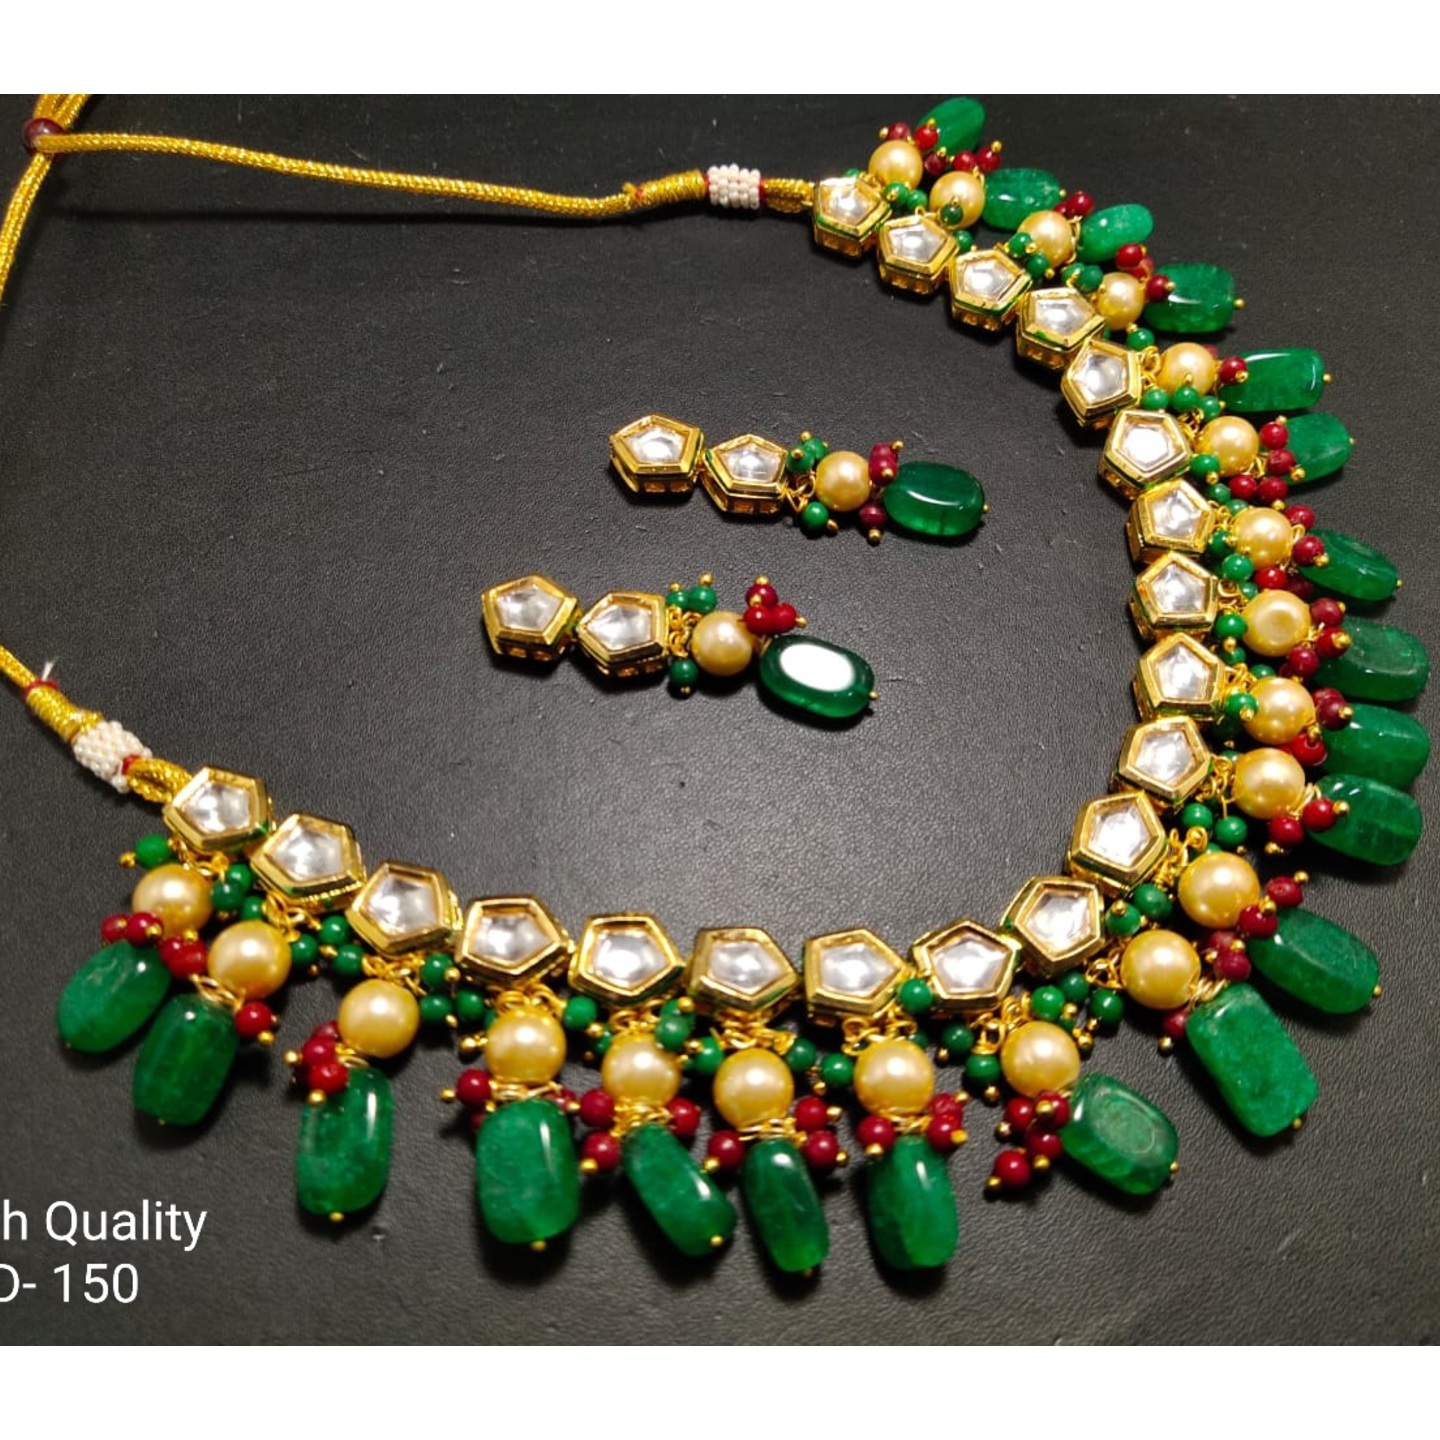 See Green Gold Tone Kundan Necklace With Earring Onyx Pearls